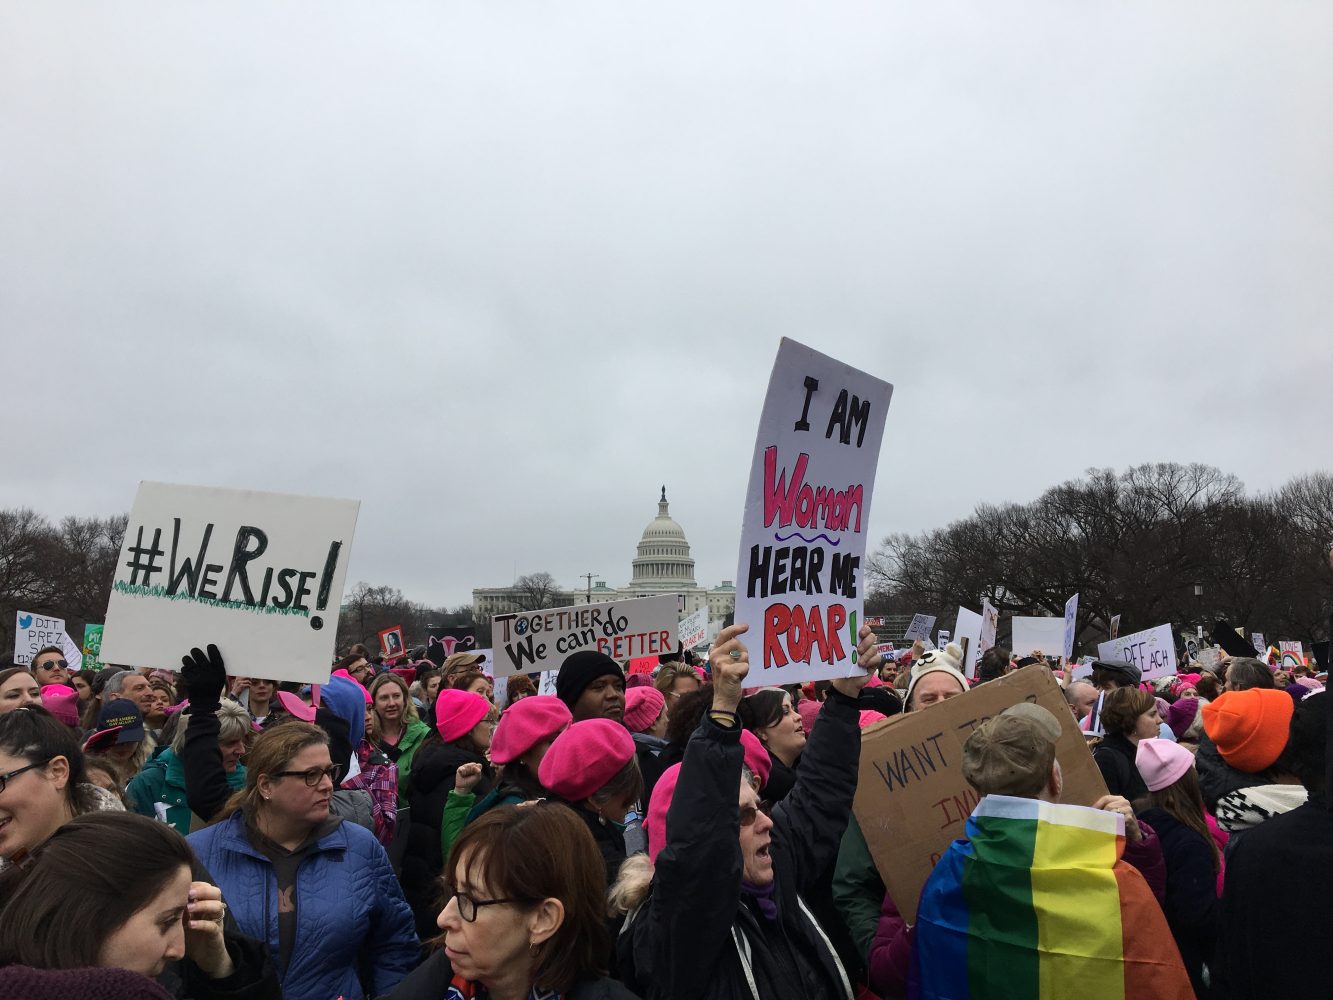 Signs+reading+I+am+woman+hear+me+roar+are+held+in+front+of+the+Capitol+building+in+Washington%2C+D.C.+